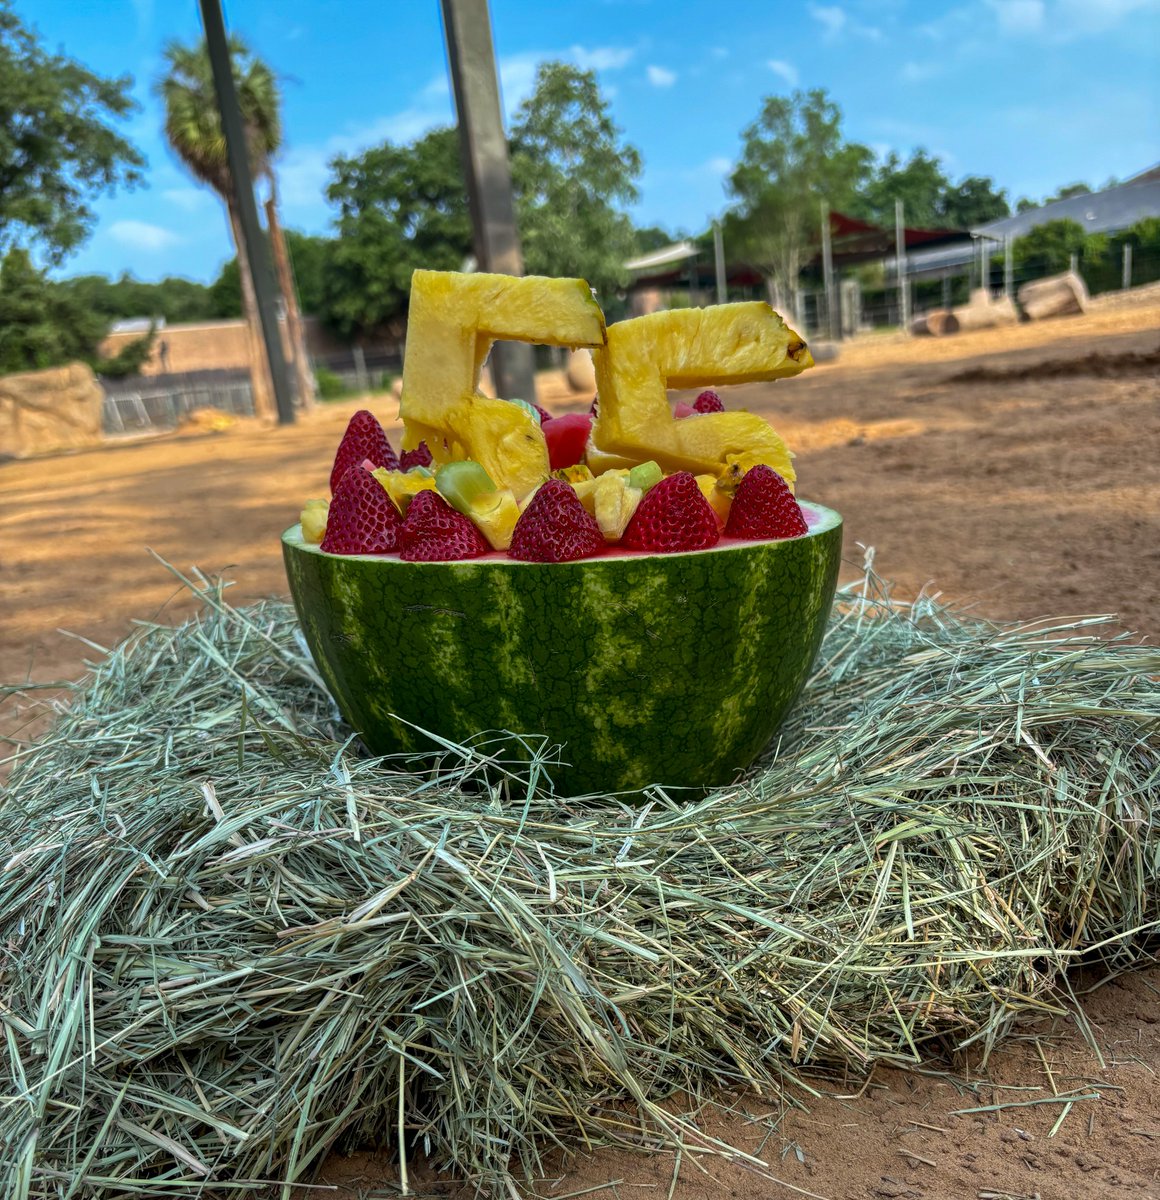 Methai is 55! Our matriarch’s animal care team prepared a watermelon cake topped with fruit, including strawberries and pineapple, to get into the summertime mood. Make it a Zoo day and stop by to see our Asian elephant matriarch this weekend. 📸: Elephant Keeper Kendra